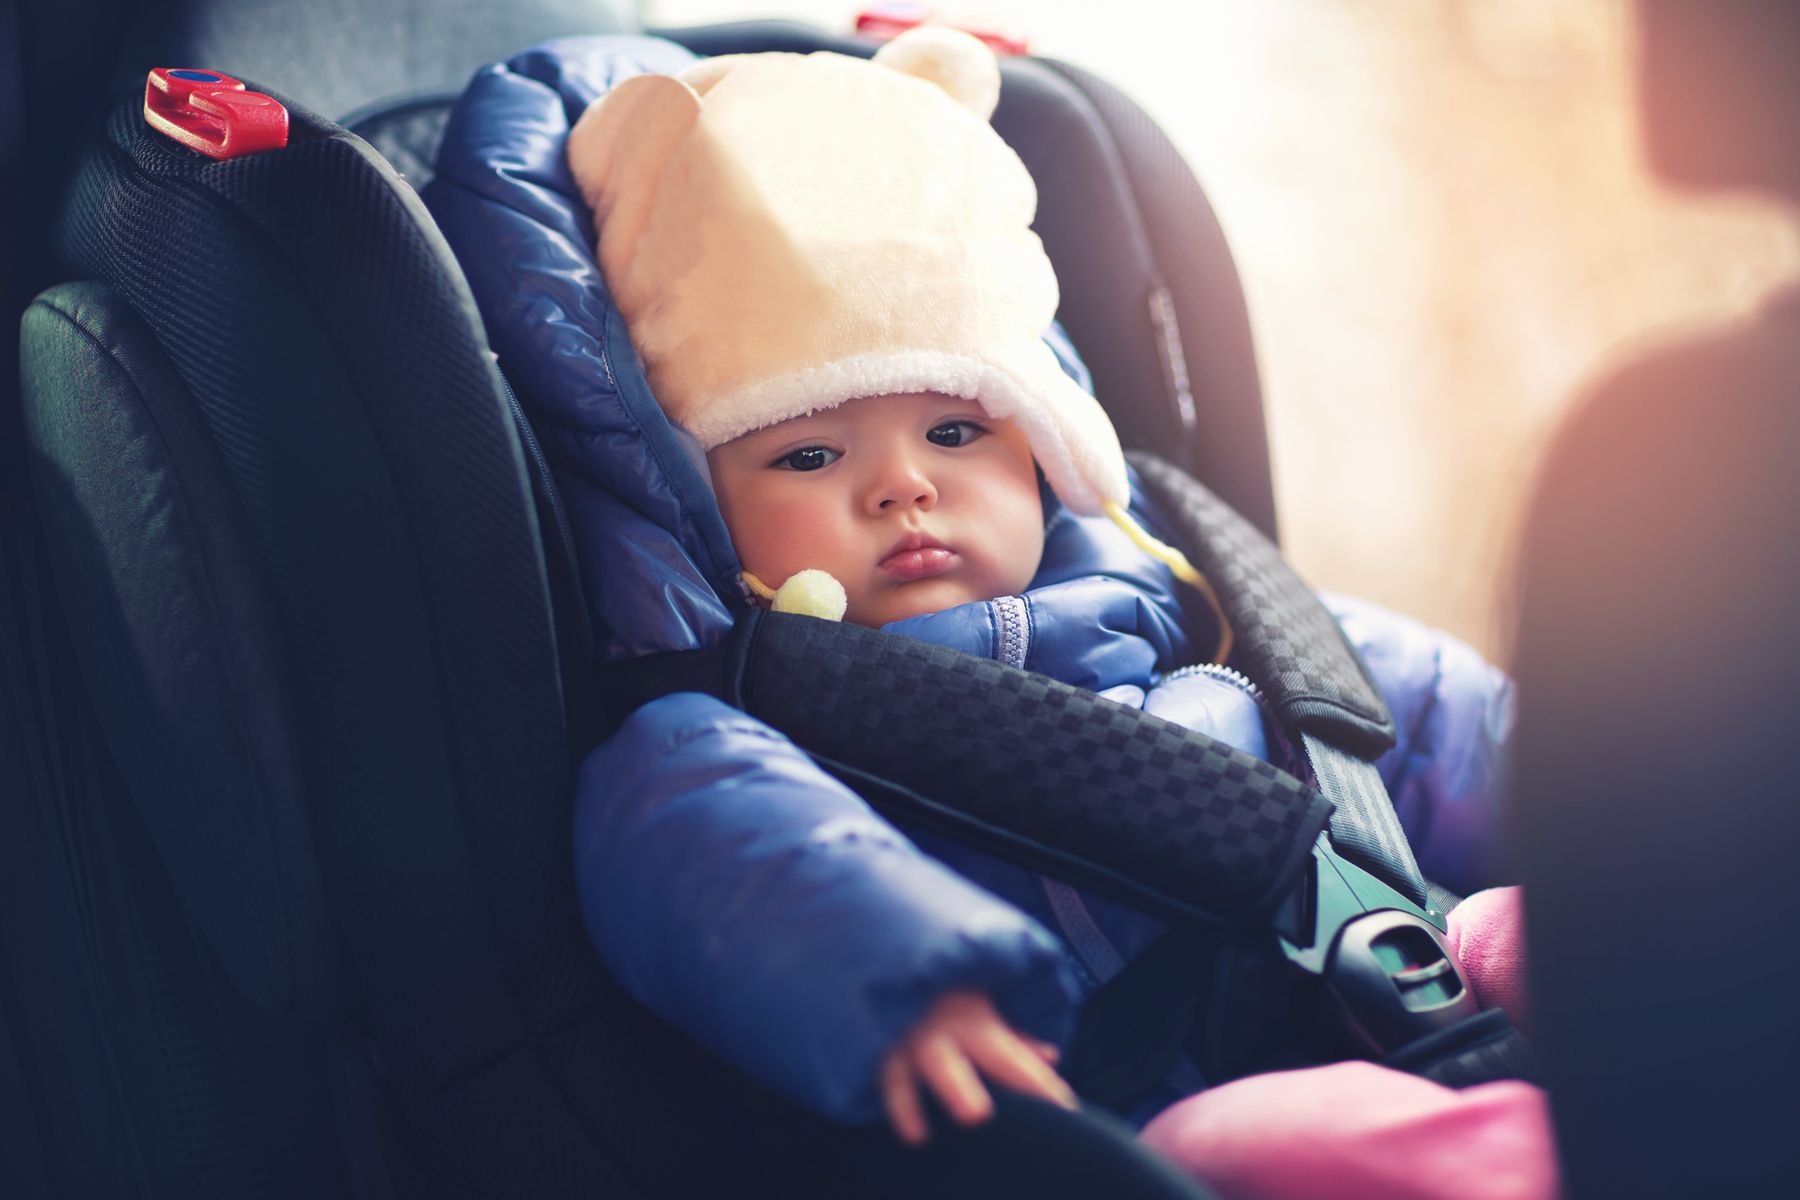 Bundle your kids up for winter, but not in their car seats